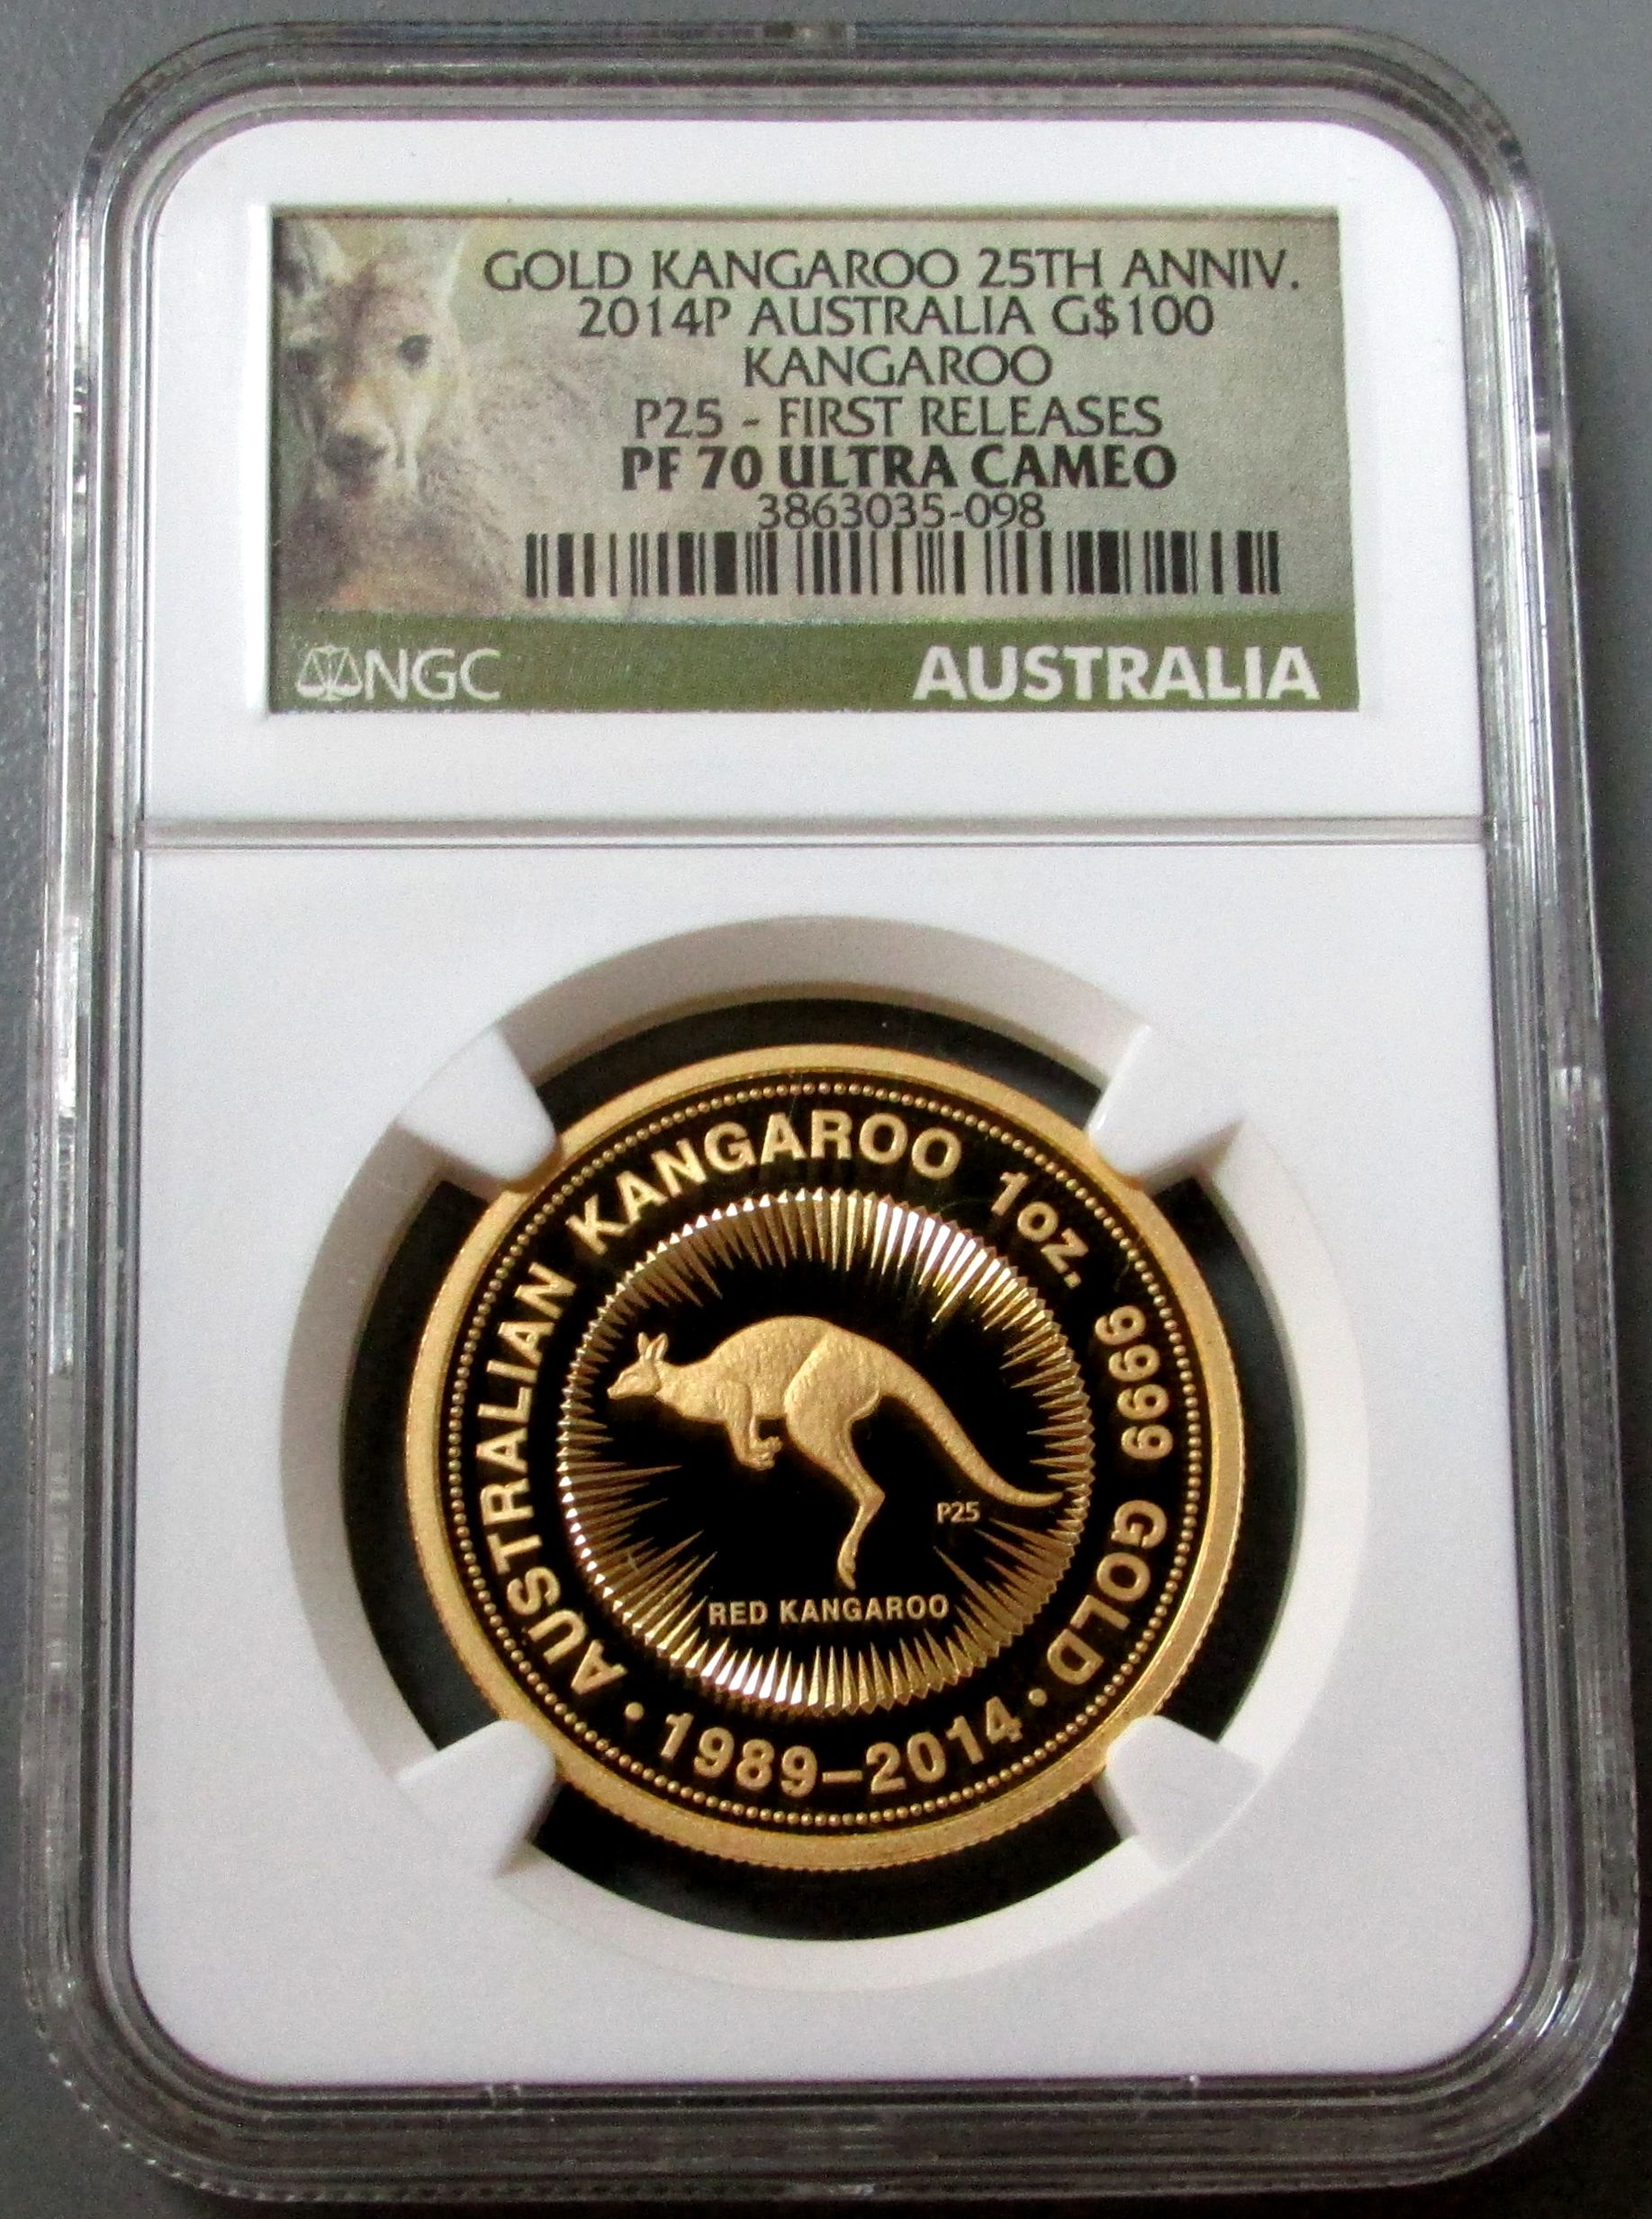 2014 P GOLD AUSTRALIA $100 KANGAROO 25th ANNIVERSARY NGC PERFECT PROOF 70 ULTRA CAMEO ONLY 310 MINTED 